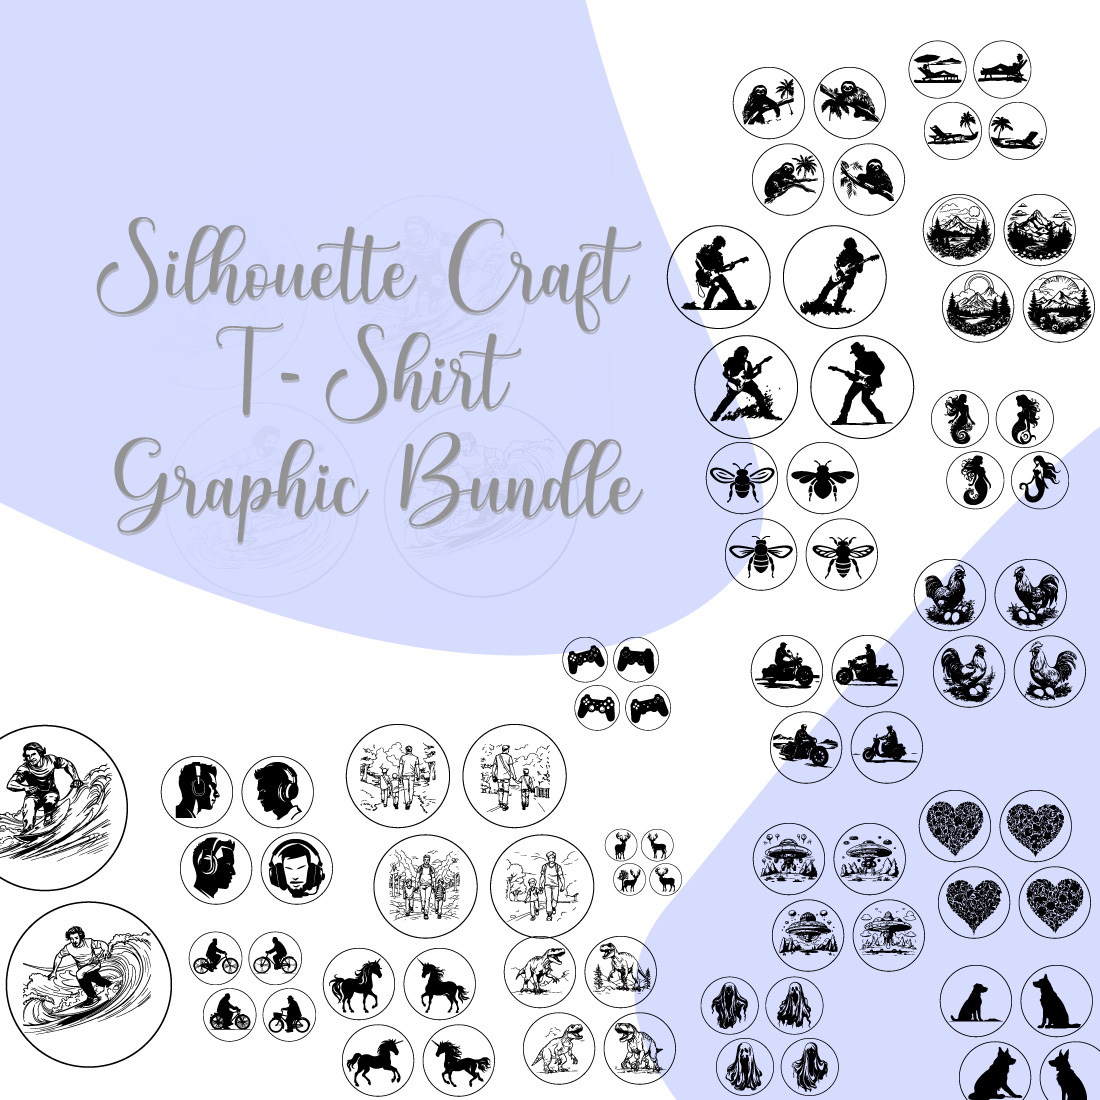 Silhouette Craft T-Shirt Graphic Bundle cover image.